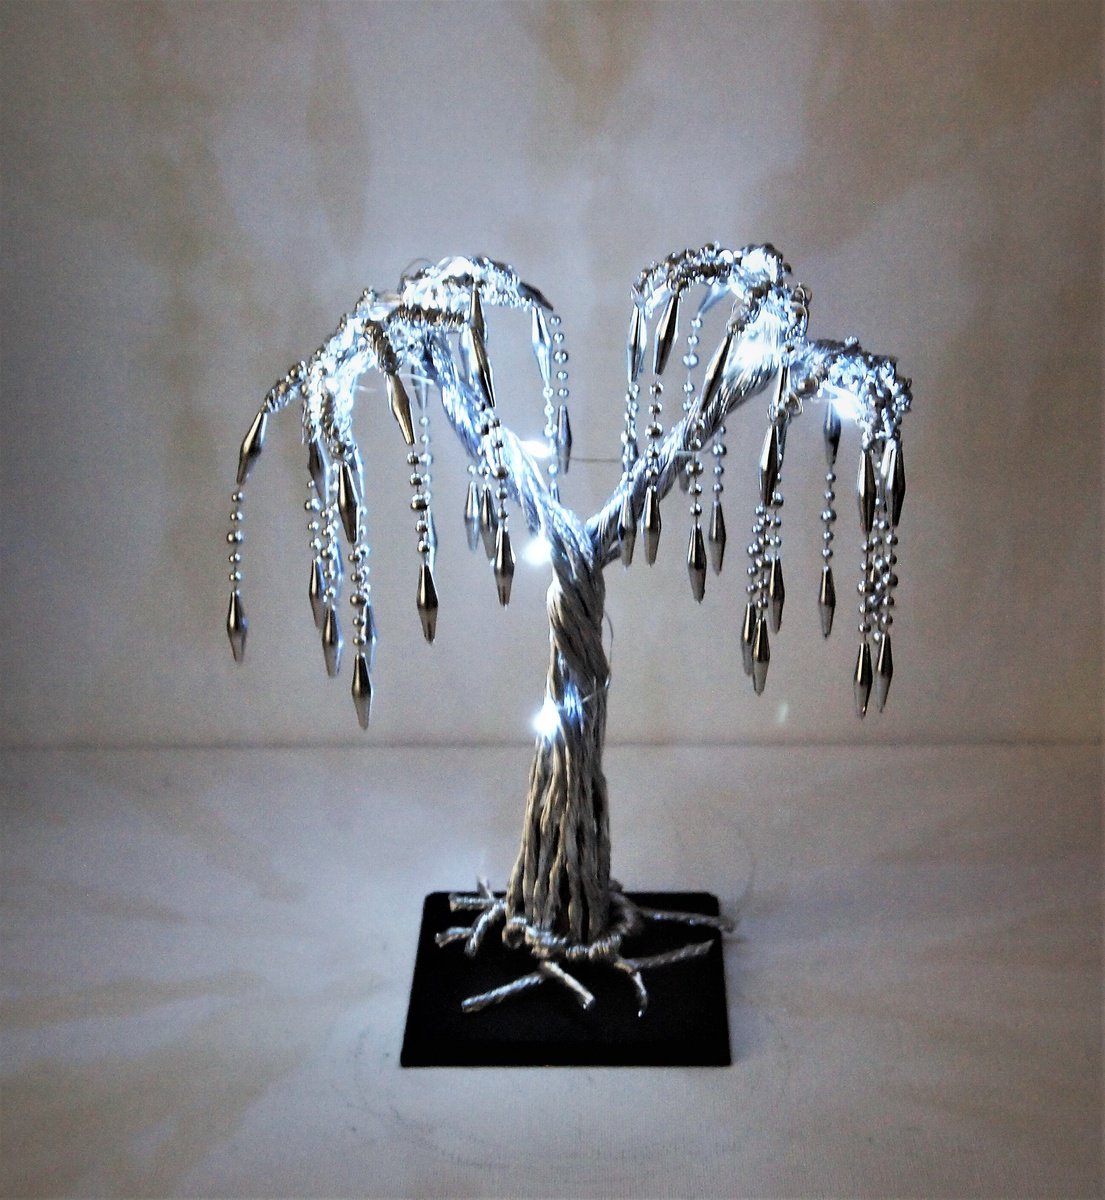 Silver wire Willow tree sculpture with Beads and Bright white LED lights by Steph Morgan